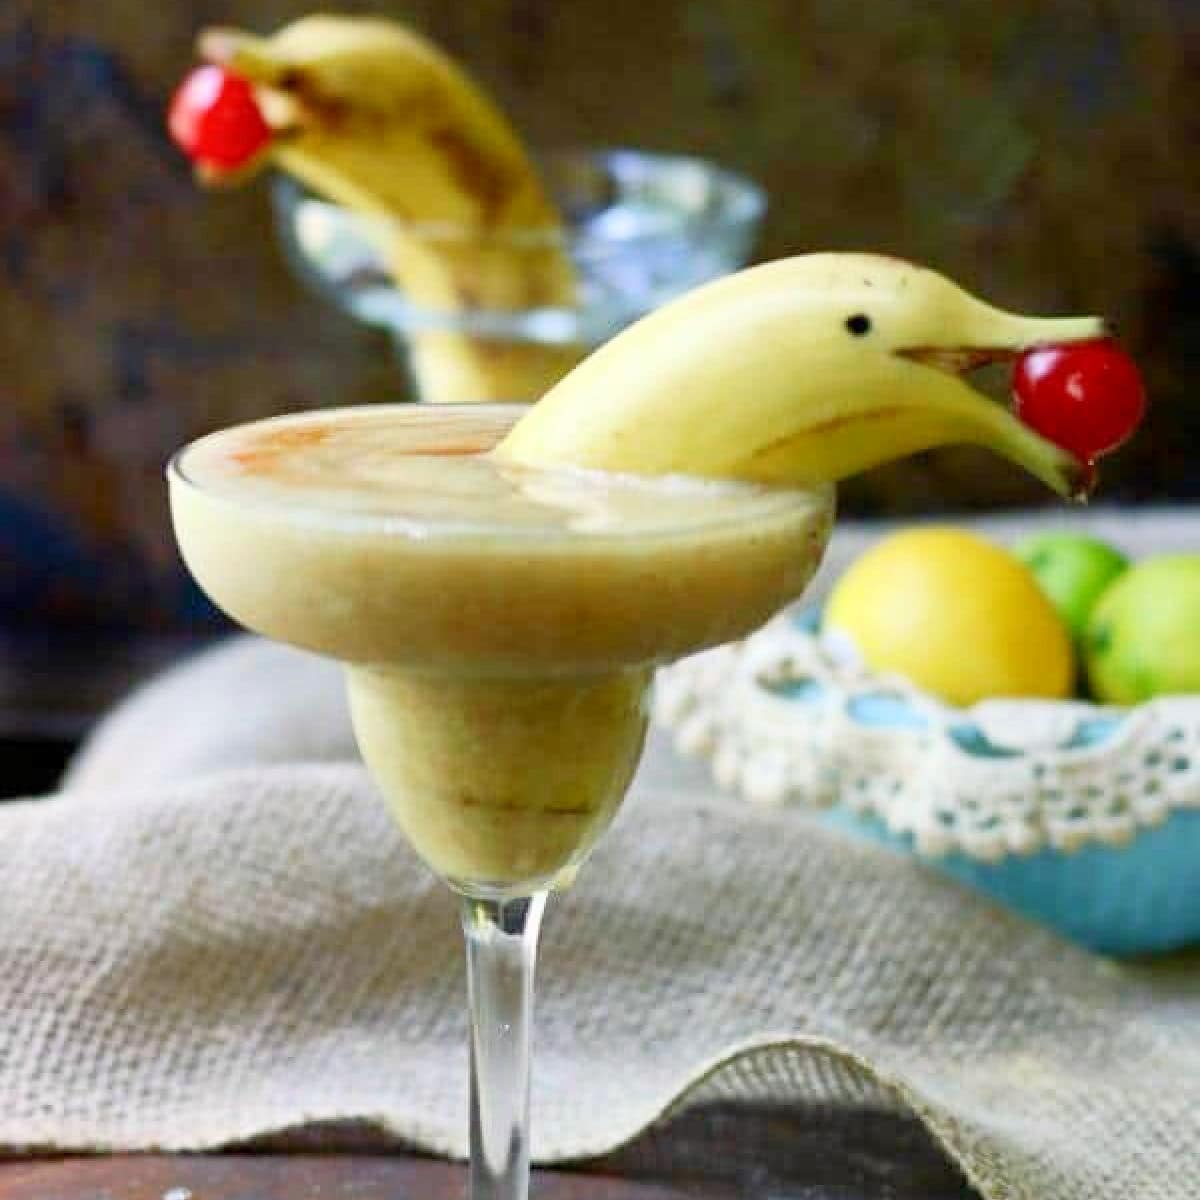 Closeup of two banana daiquiris garnished with bananas cut to look like dolphins.